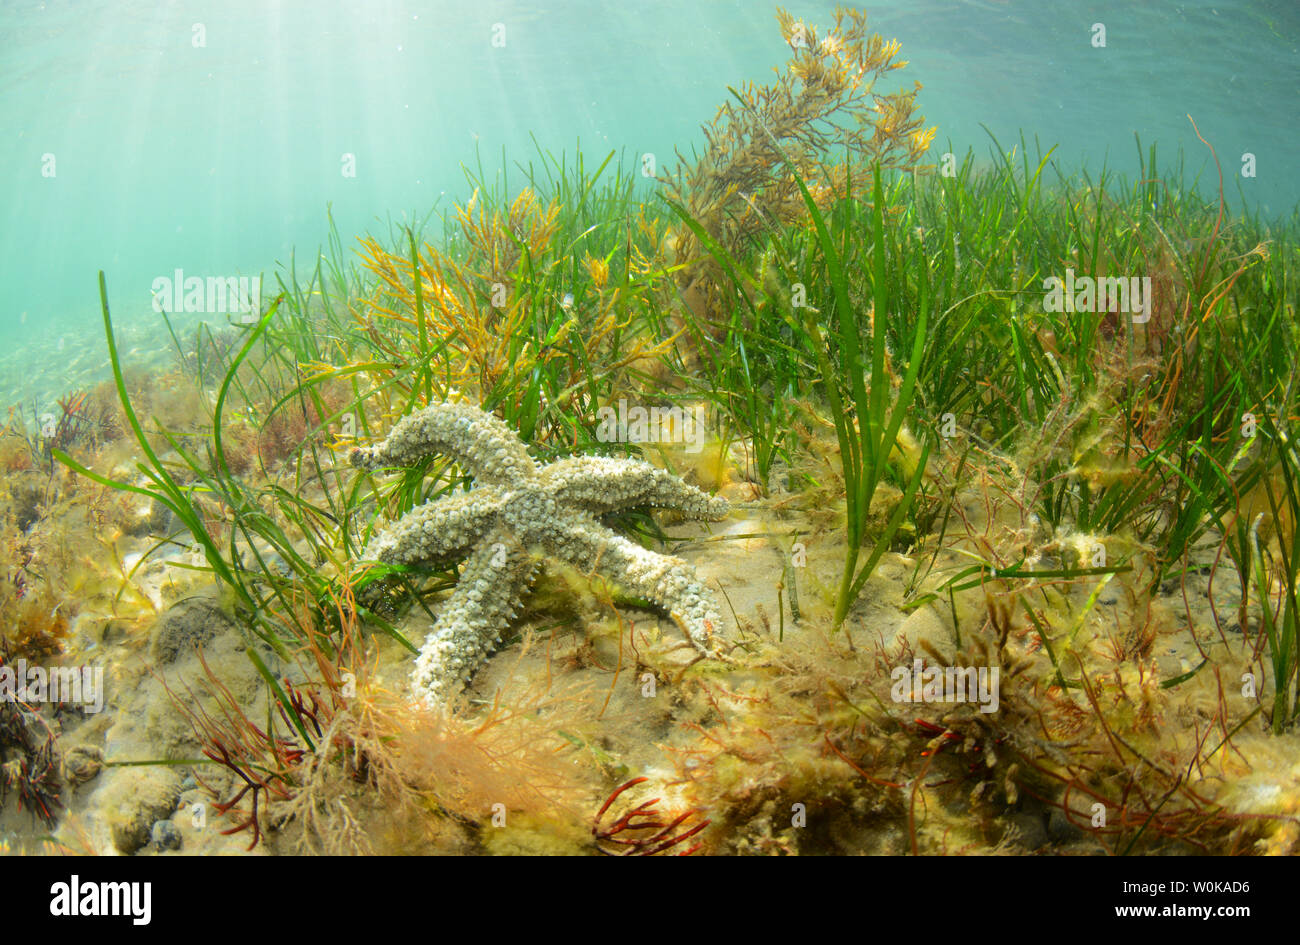 Spiny starfish on a a seagrass bed in Wales Stock Photo